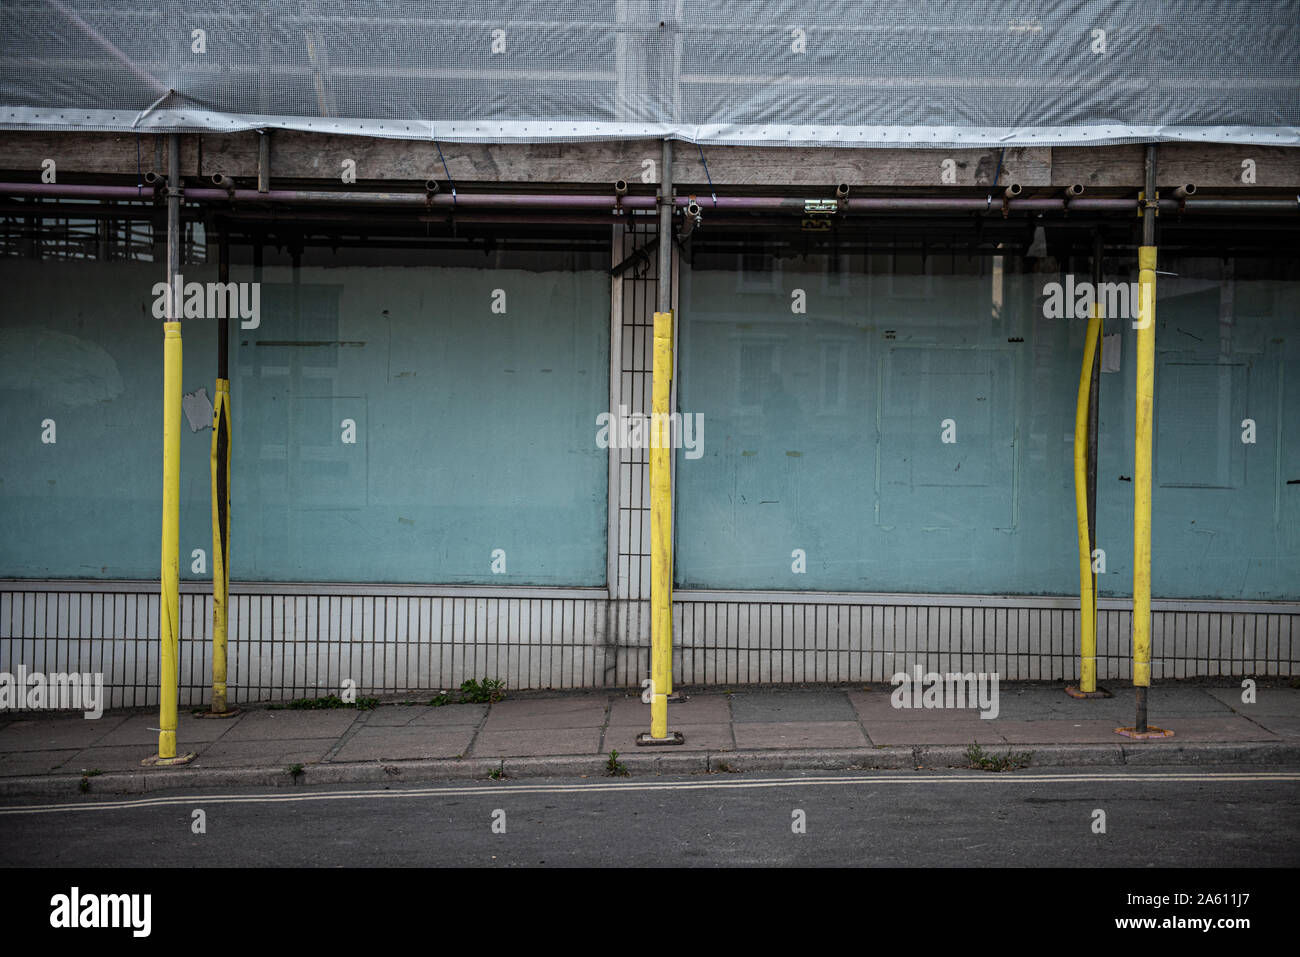 a street scene of an abandoned building in torquay surrounded with scaffolding with yellow sleeves. Stock Photo